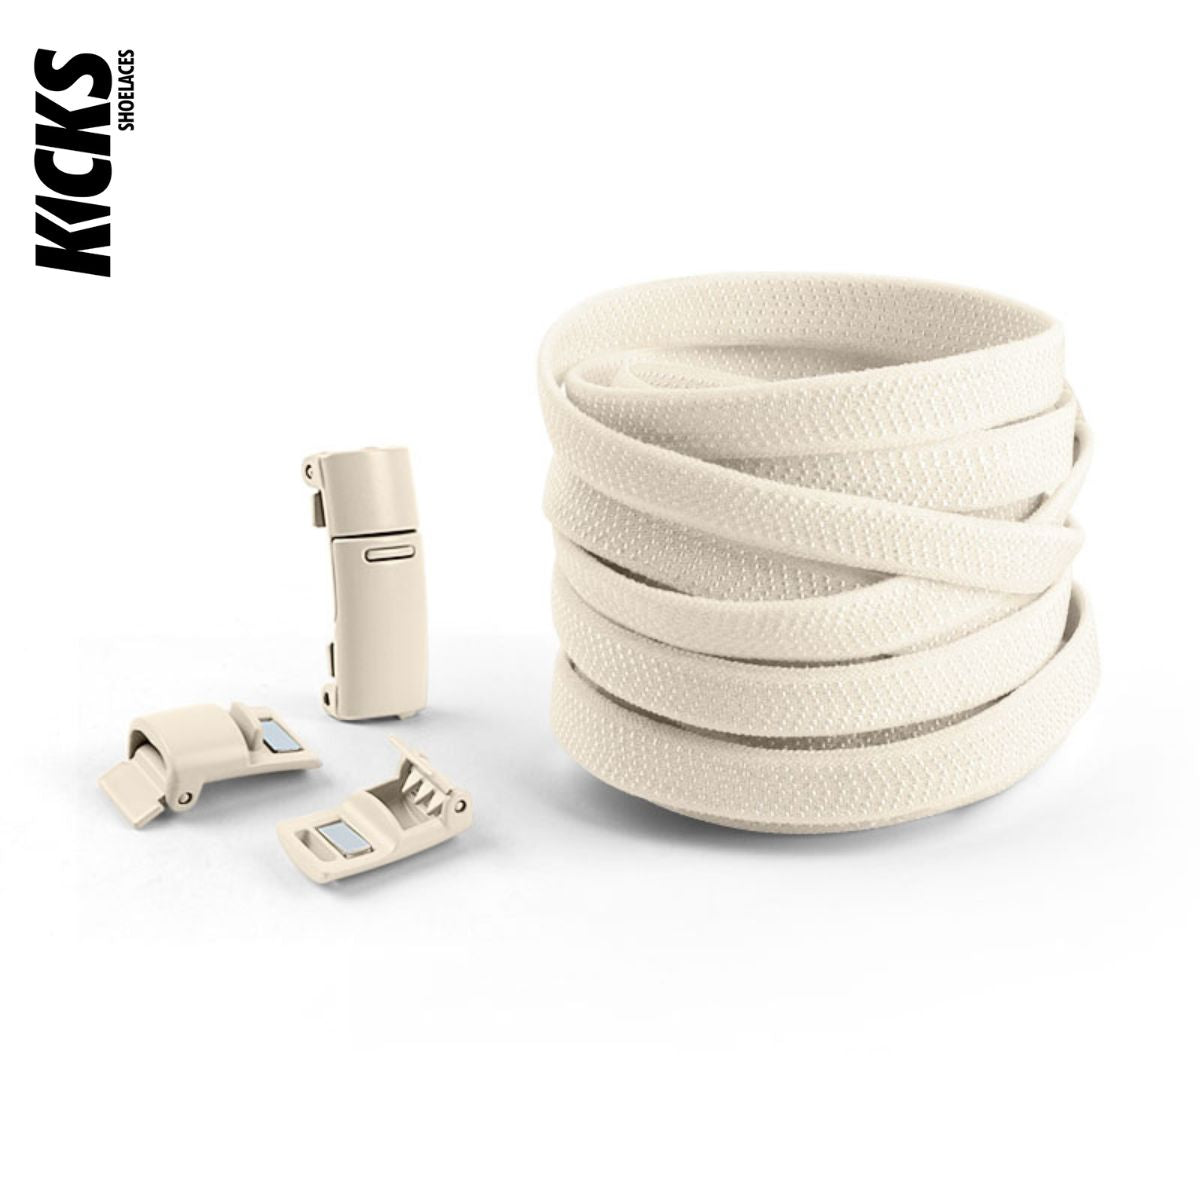 Beige No-Tie Shoelaces with Magnetic Locks